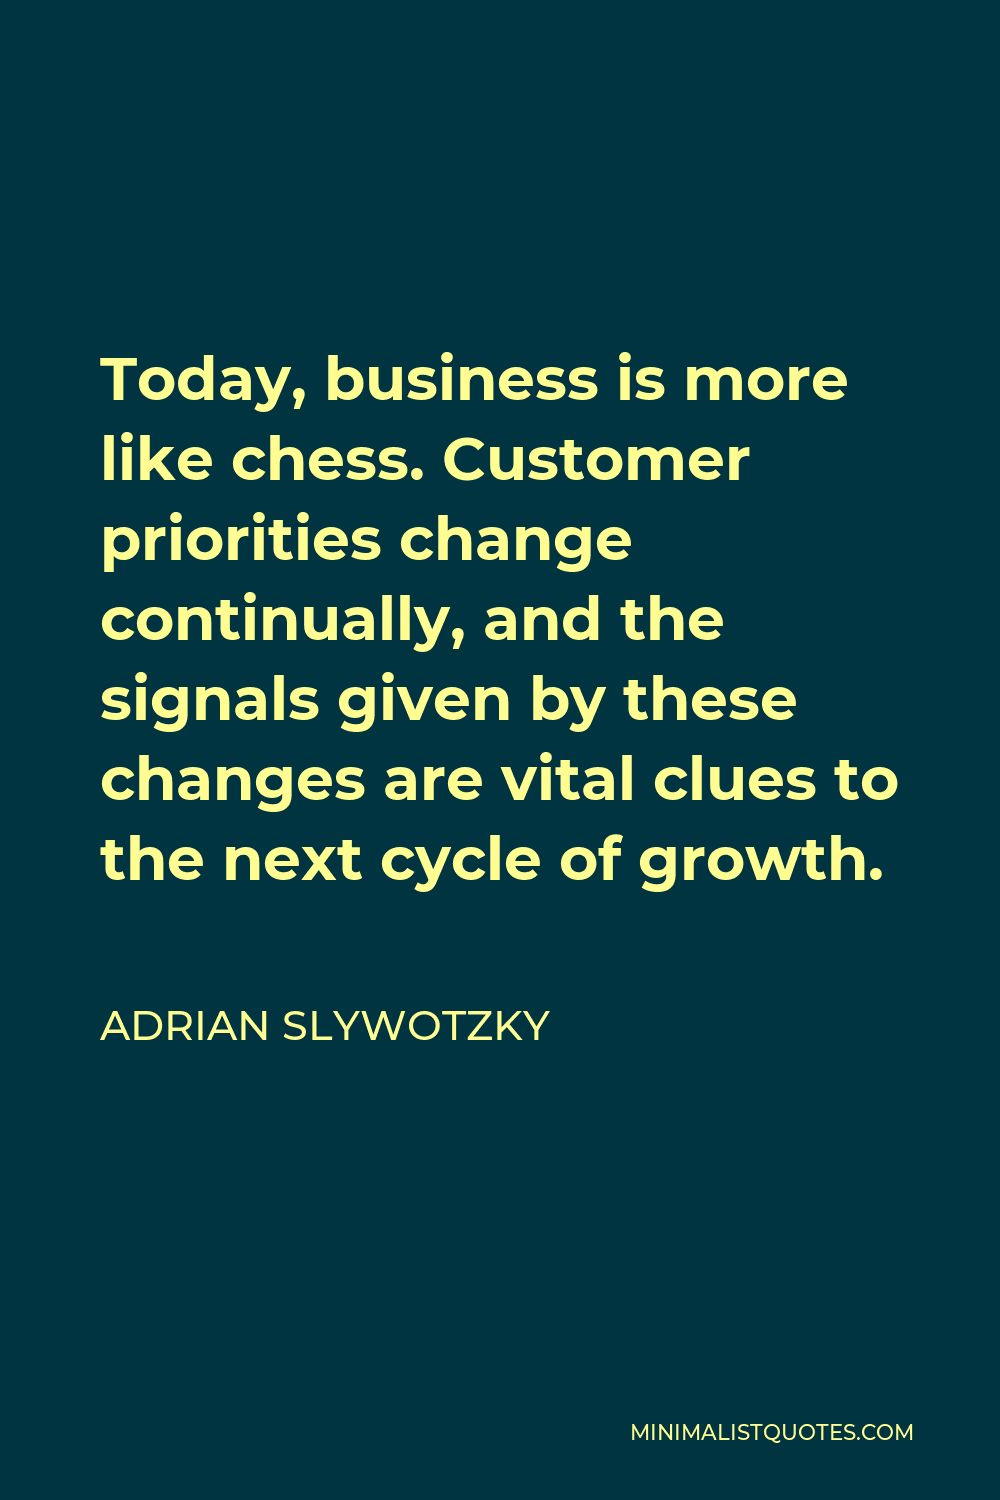 Adrian Slywotzky Quote - Today, business is more like chess. Customer priorities change continually, and the signals given by these changes are vital clues to the next cycle of growth.